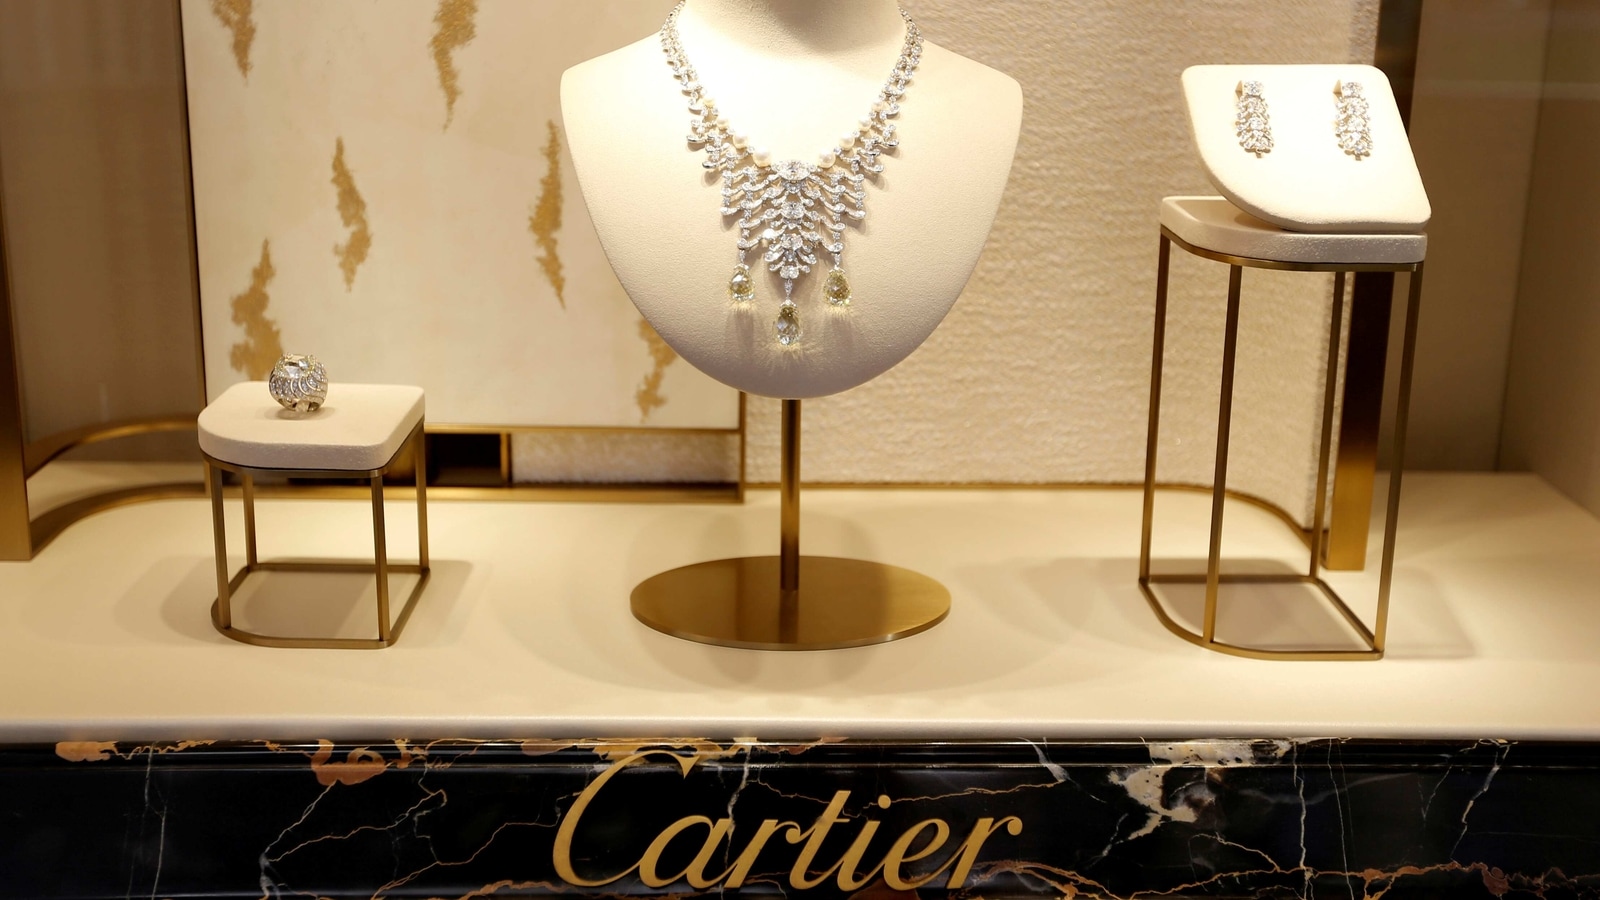 Sorry Louis Vuitton, Cartier's Billionaire Owner Is the New Luxury